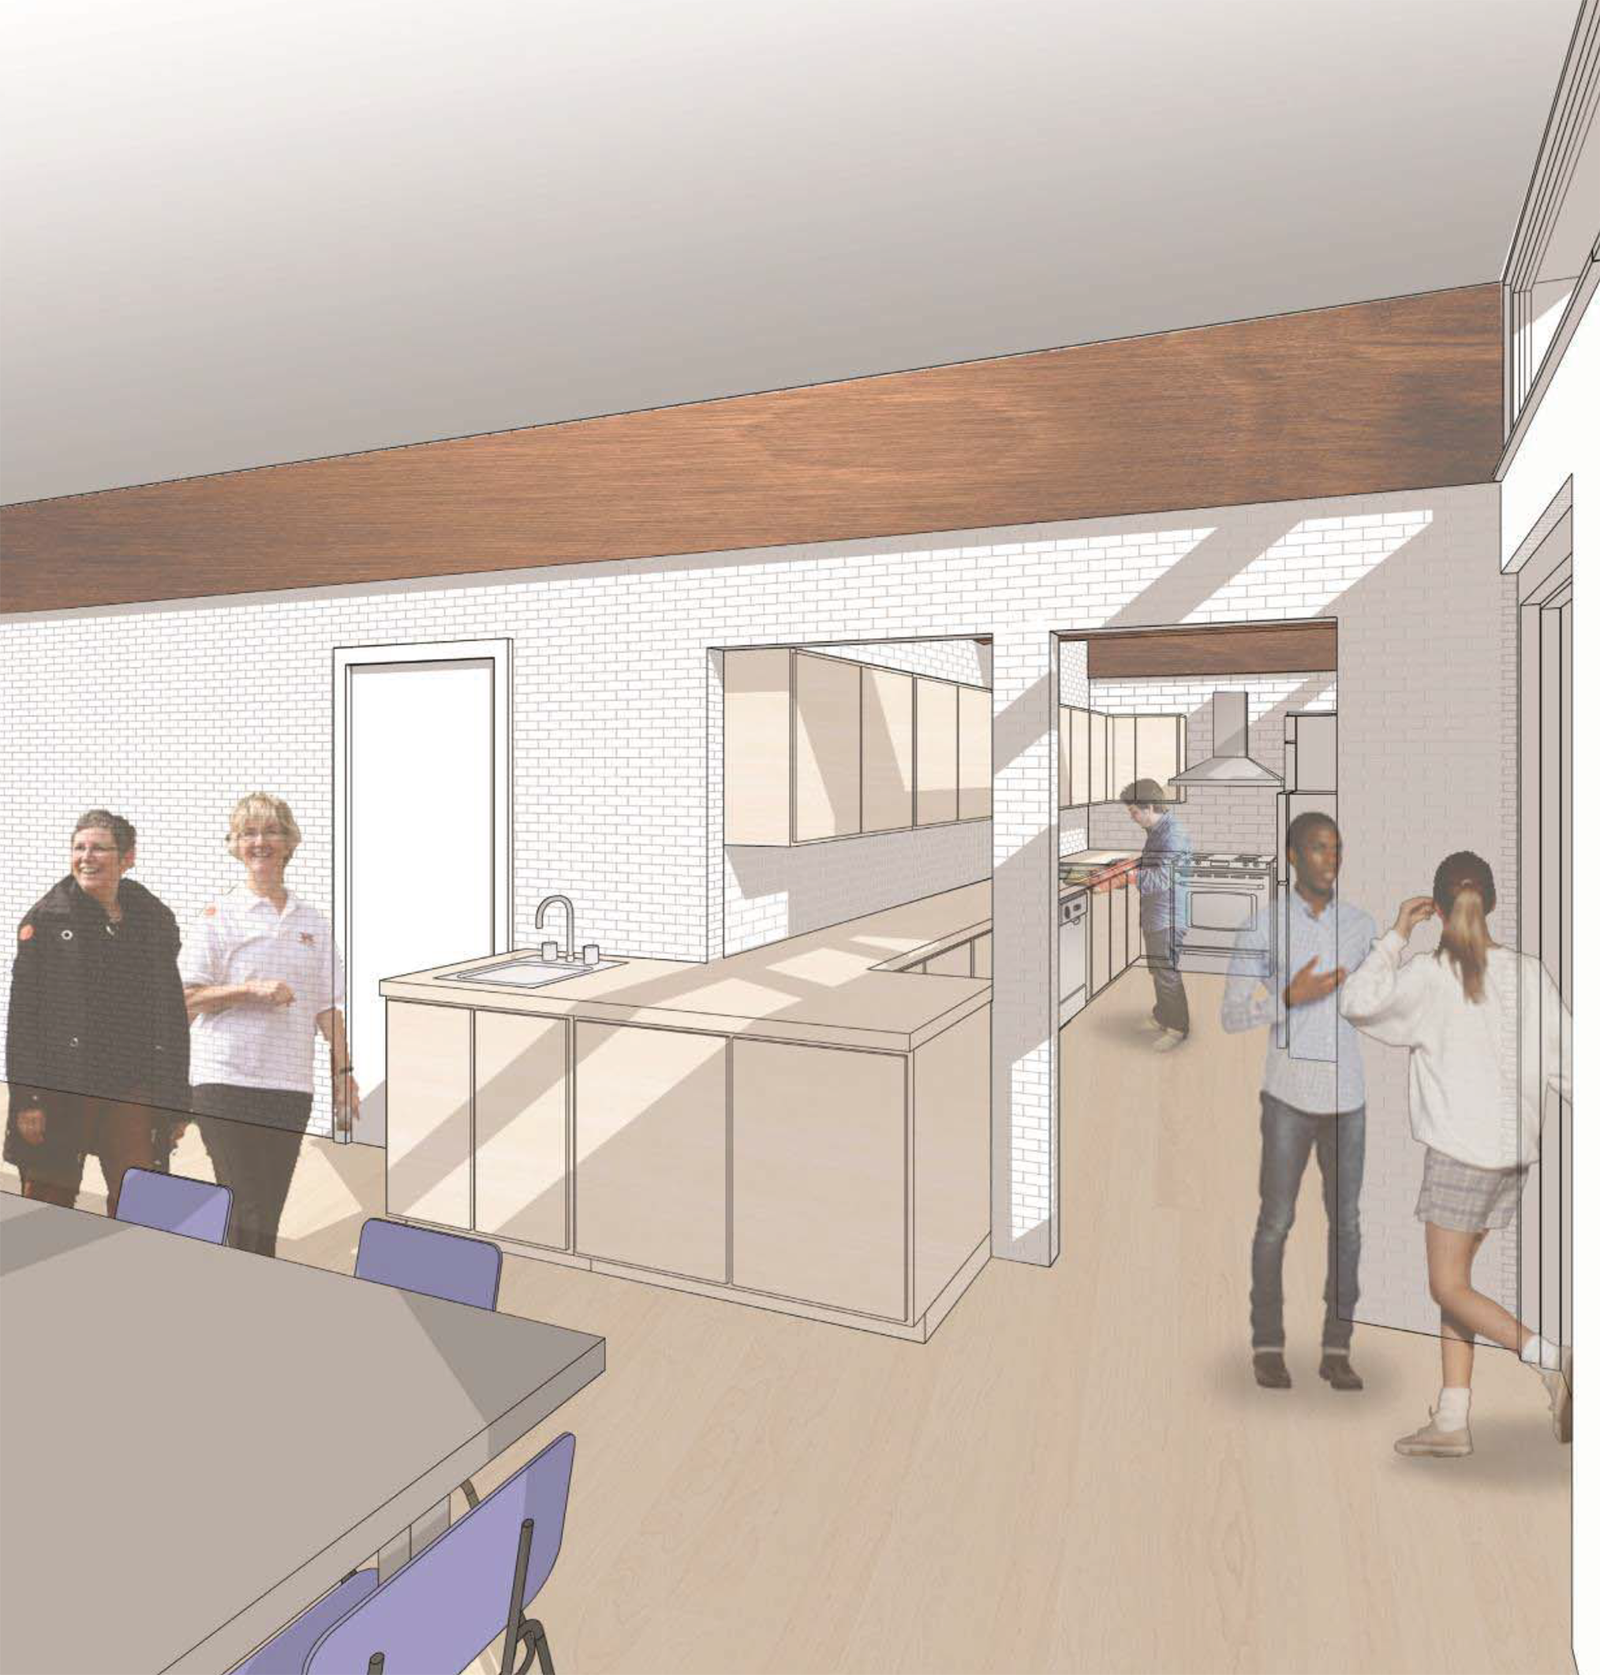 A rendering of the proposed design for the interior of the Topham Park Clubhouse, which includes a community kitchen and servery.